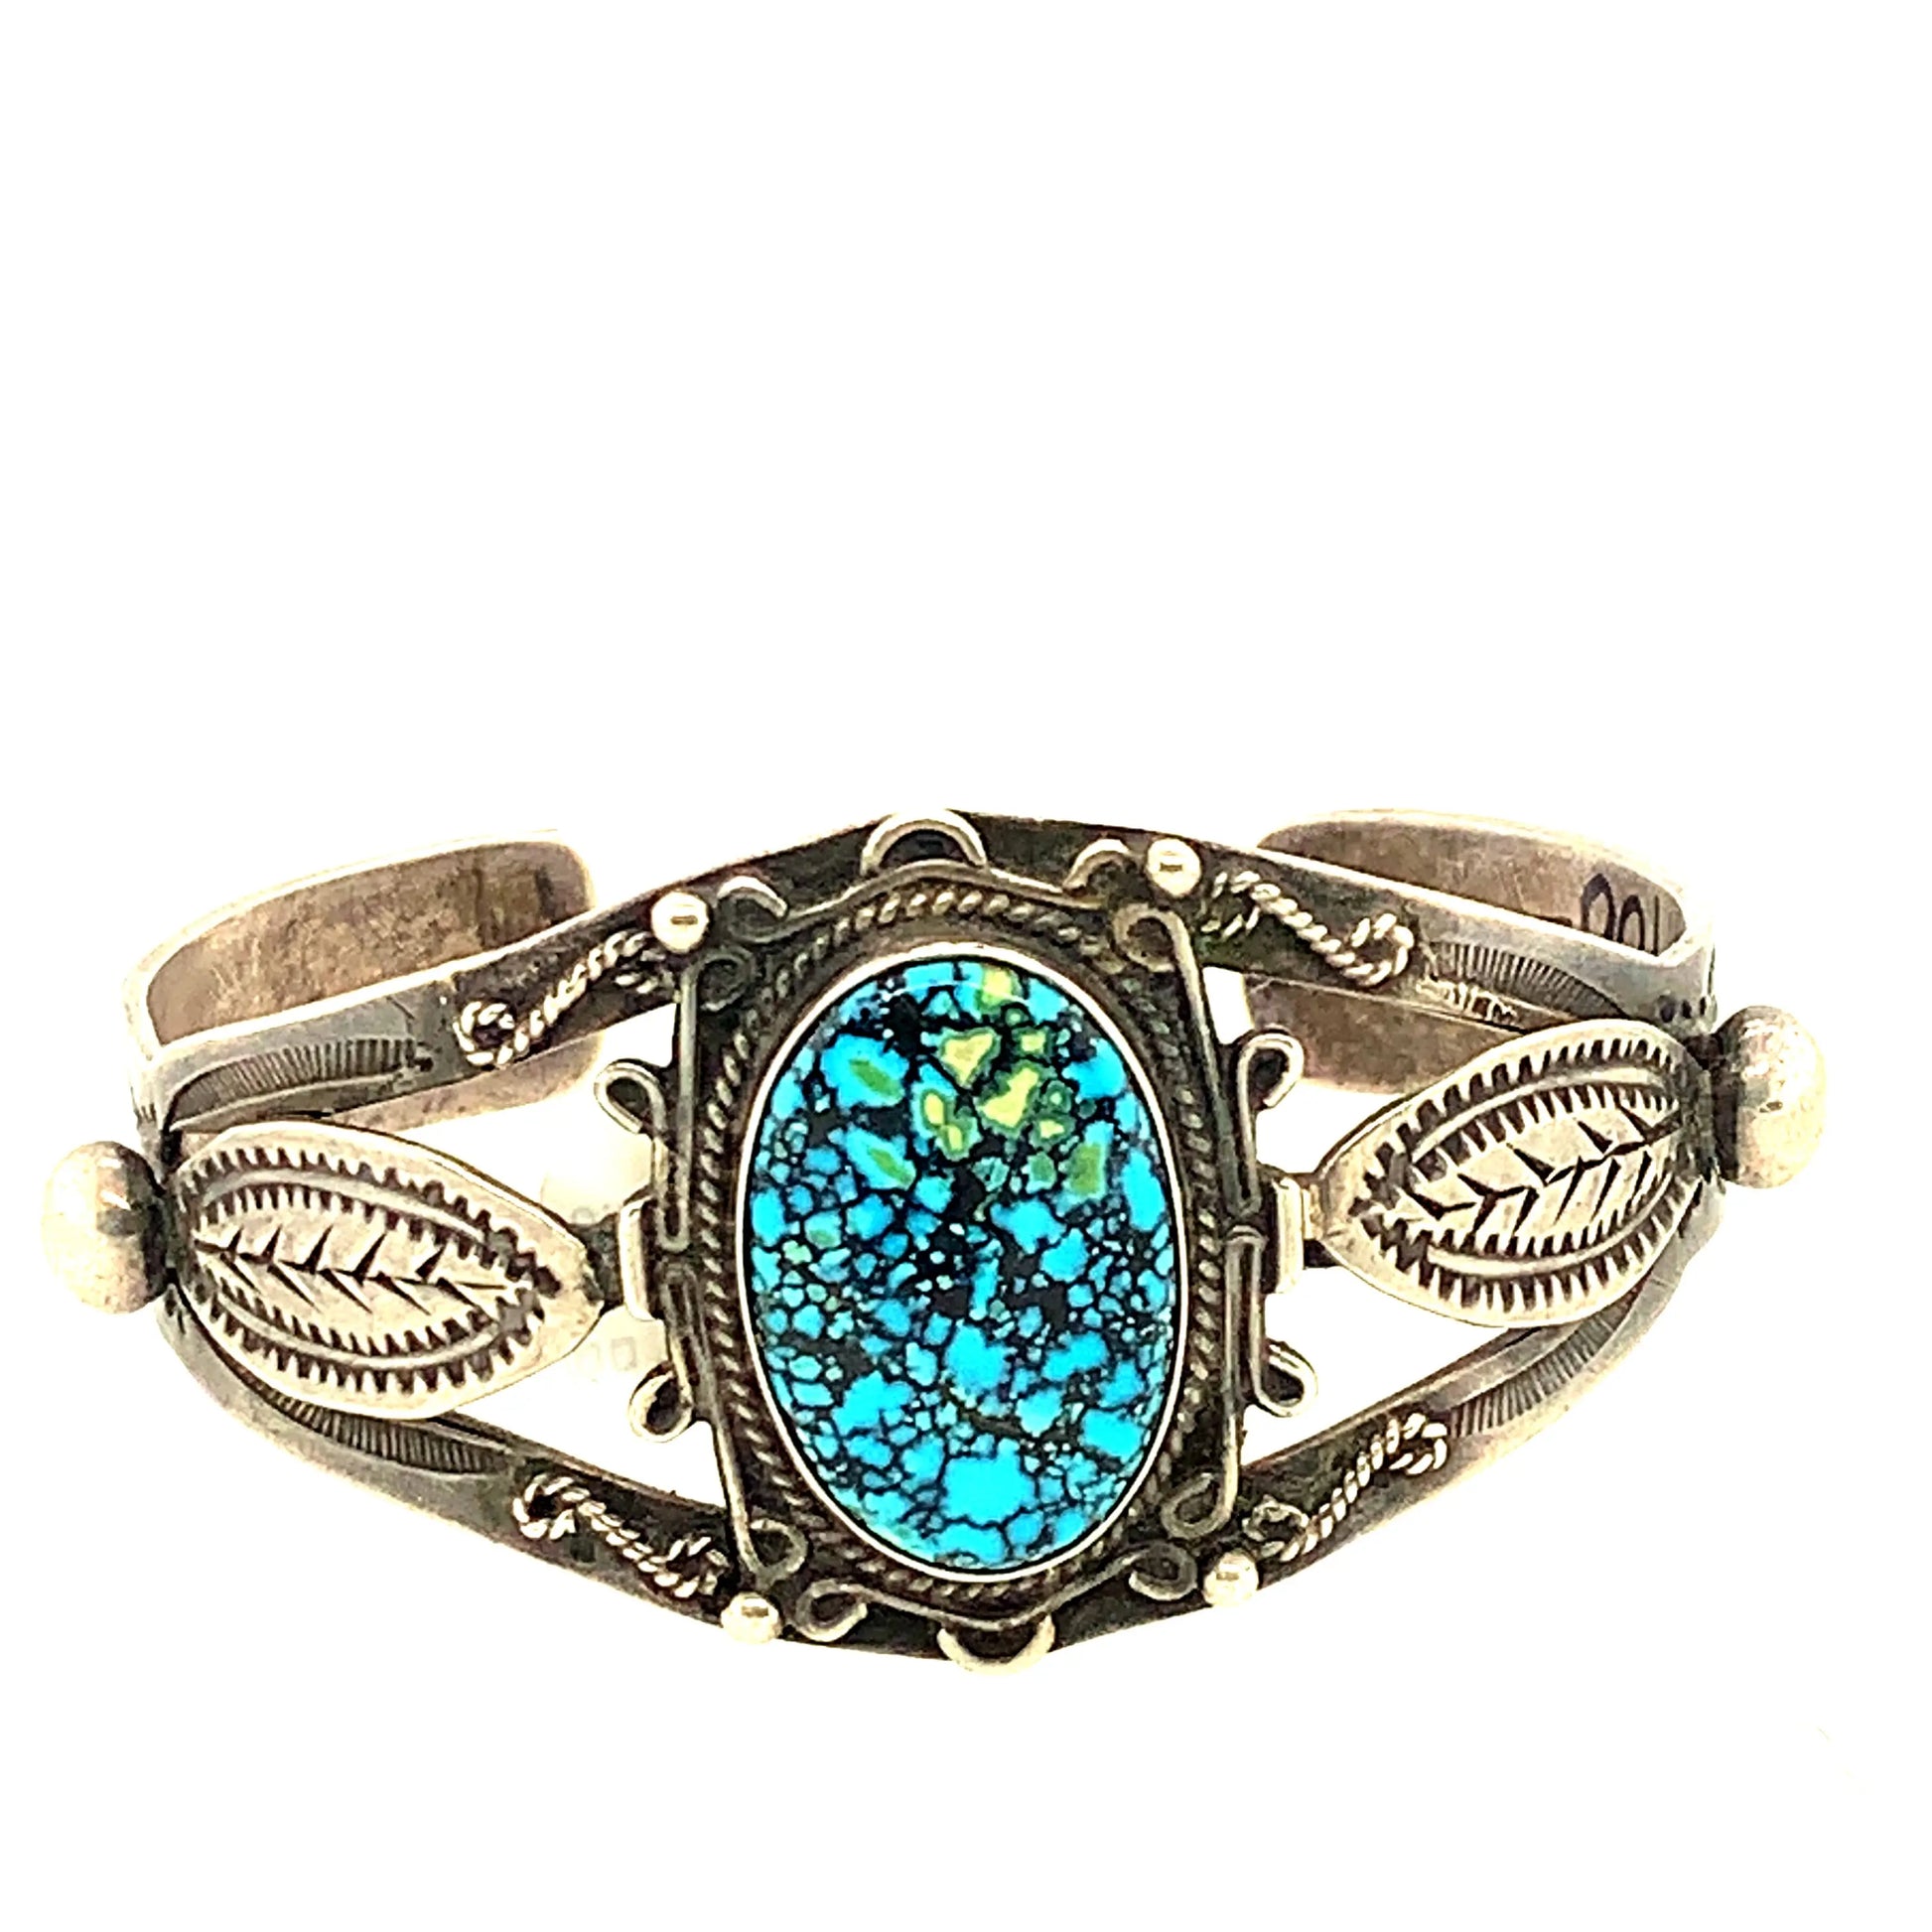 Vintage 1930s Rare #8 Turquoise Navajo Cuff  Sterling Silver, #8 Turquoise  Note - Please bear in mind that you are purchasing vintage, it might not be perfect but it will be authentic.